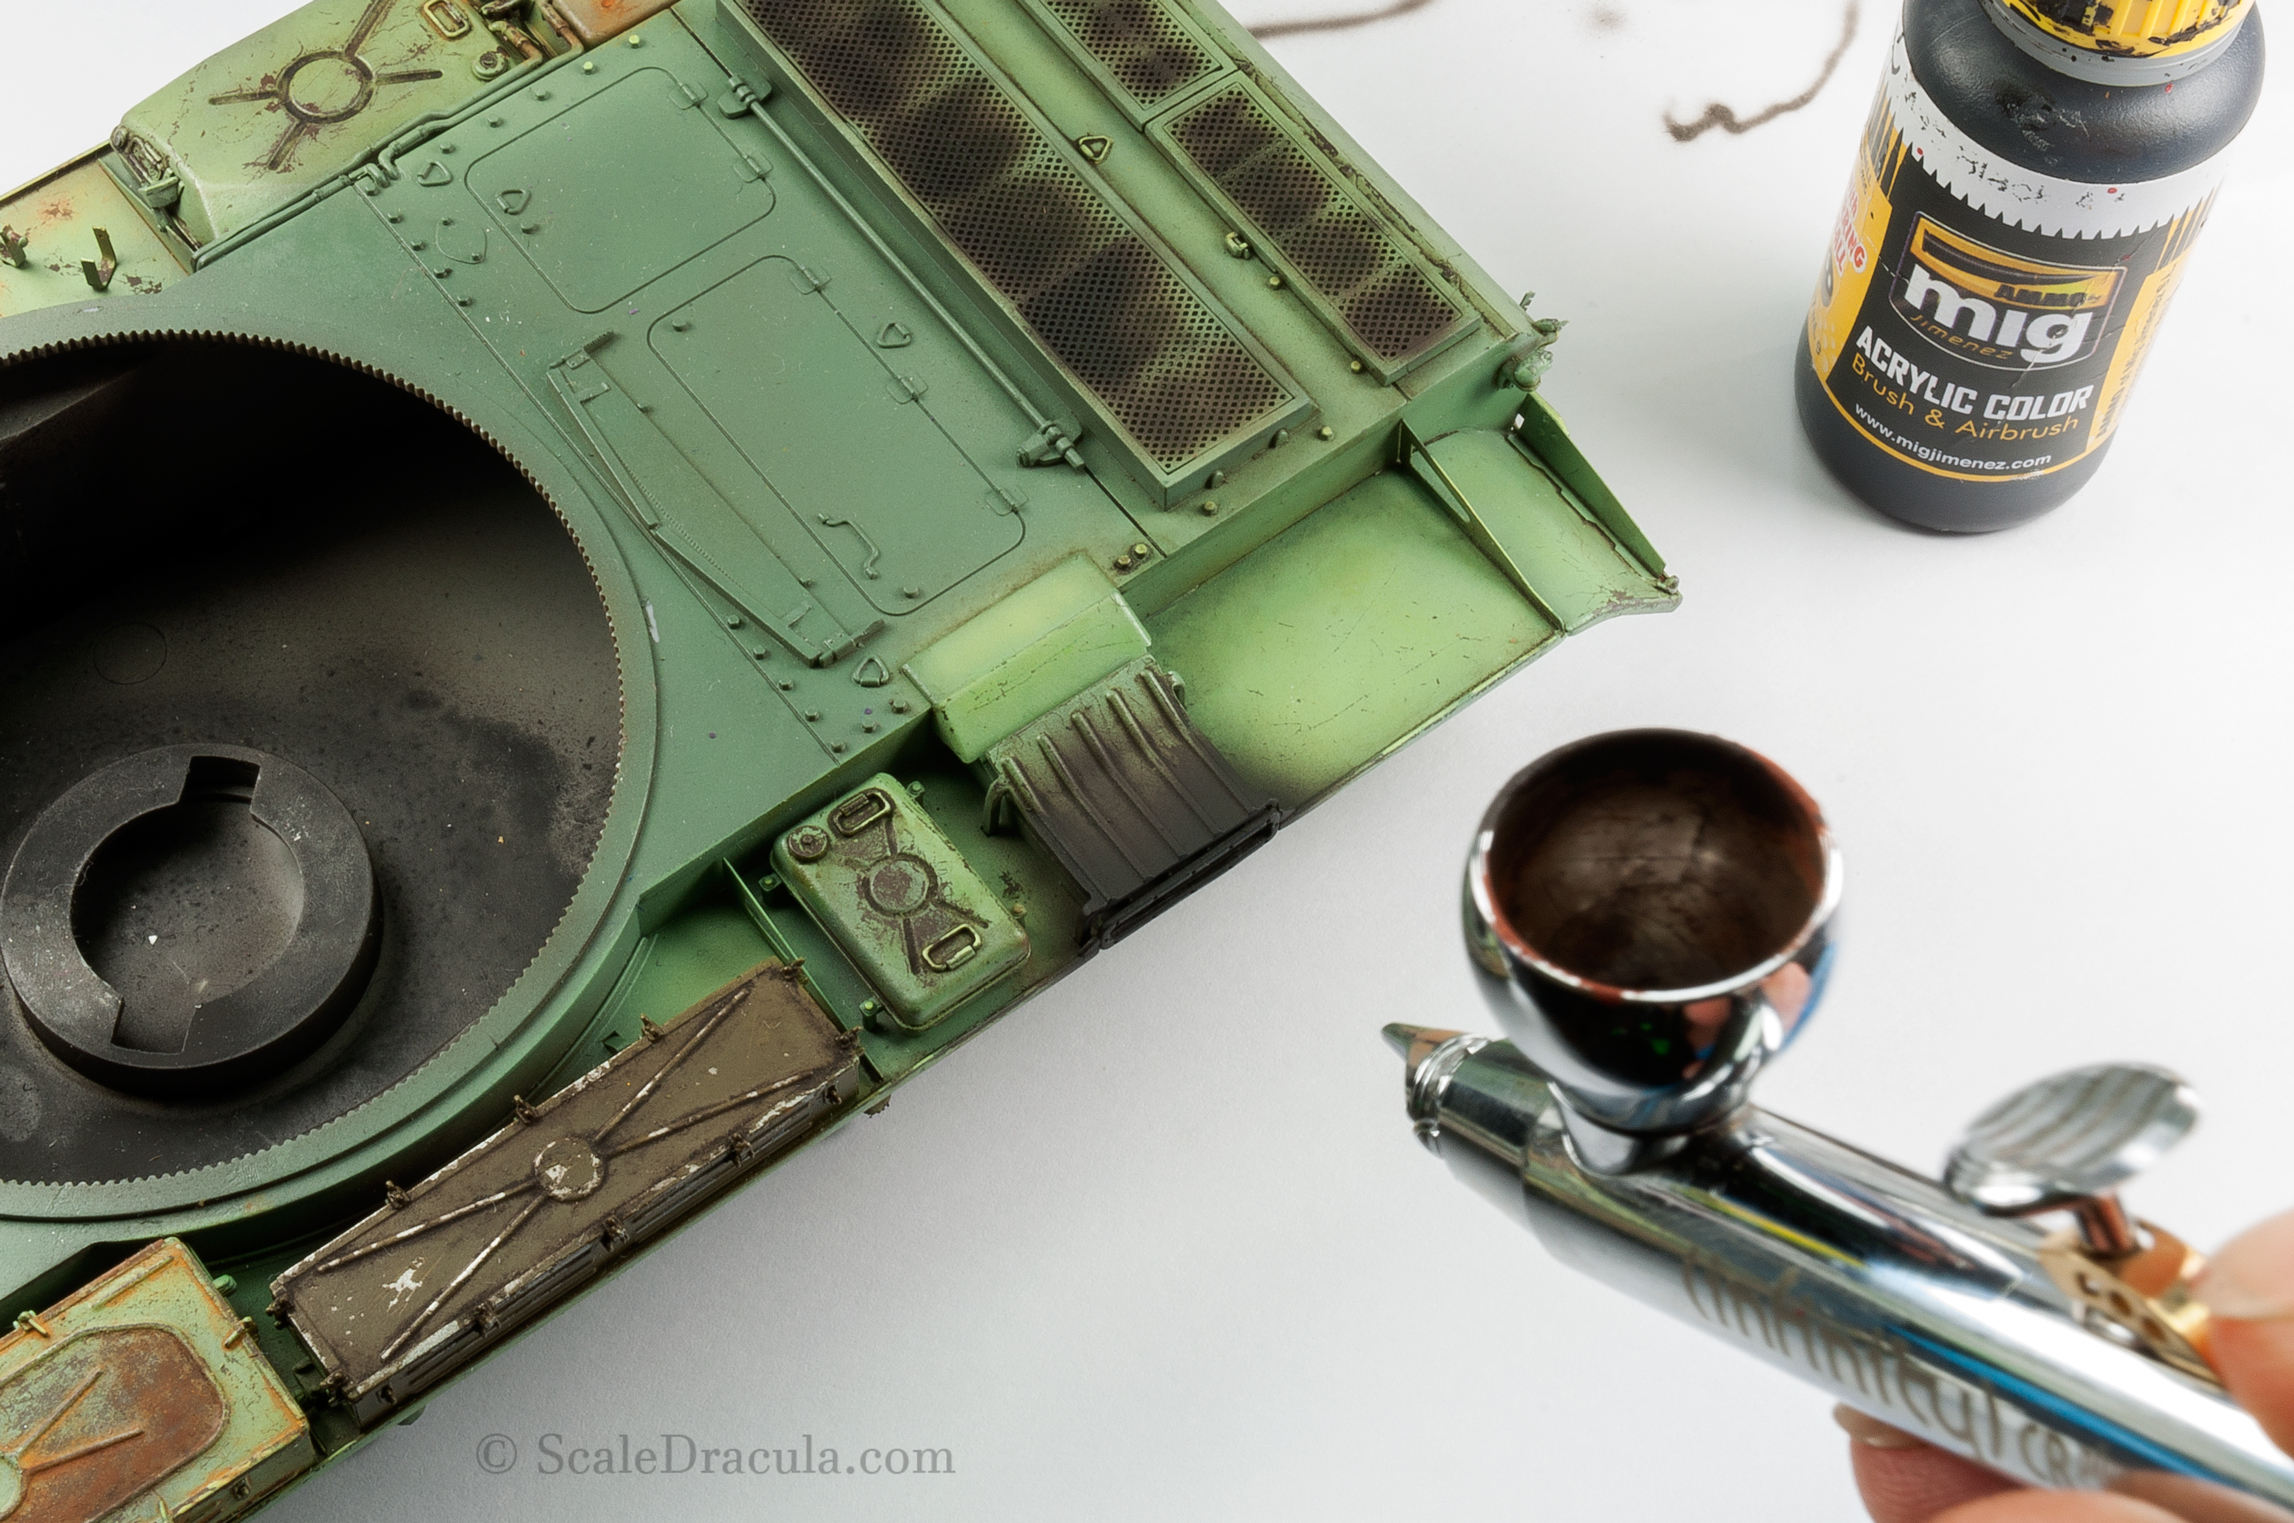 Painting the exhaust, ZSU-57 by TAKOM